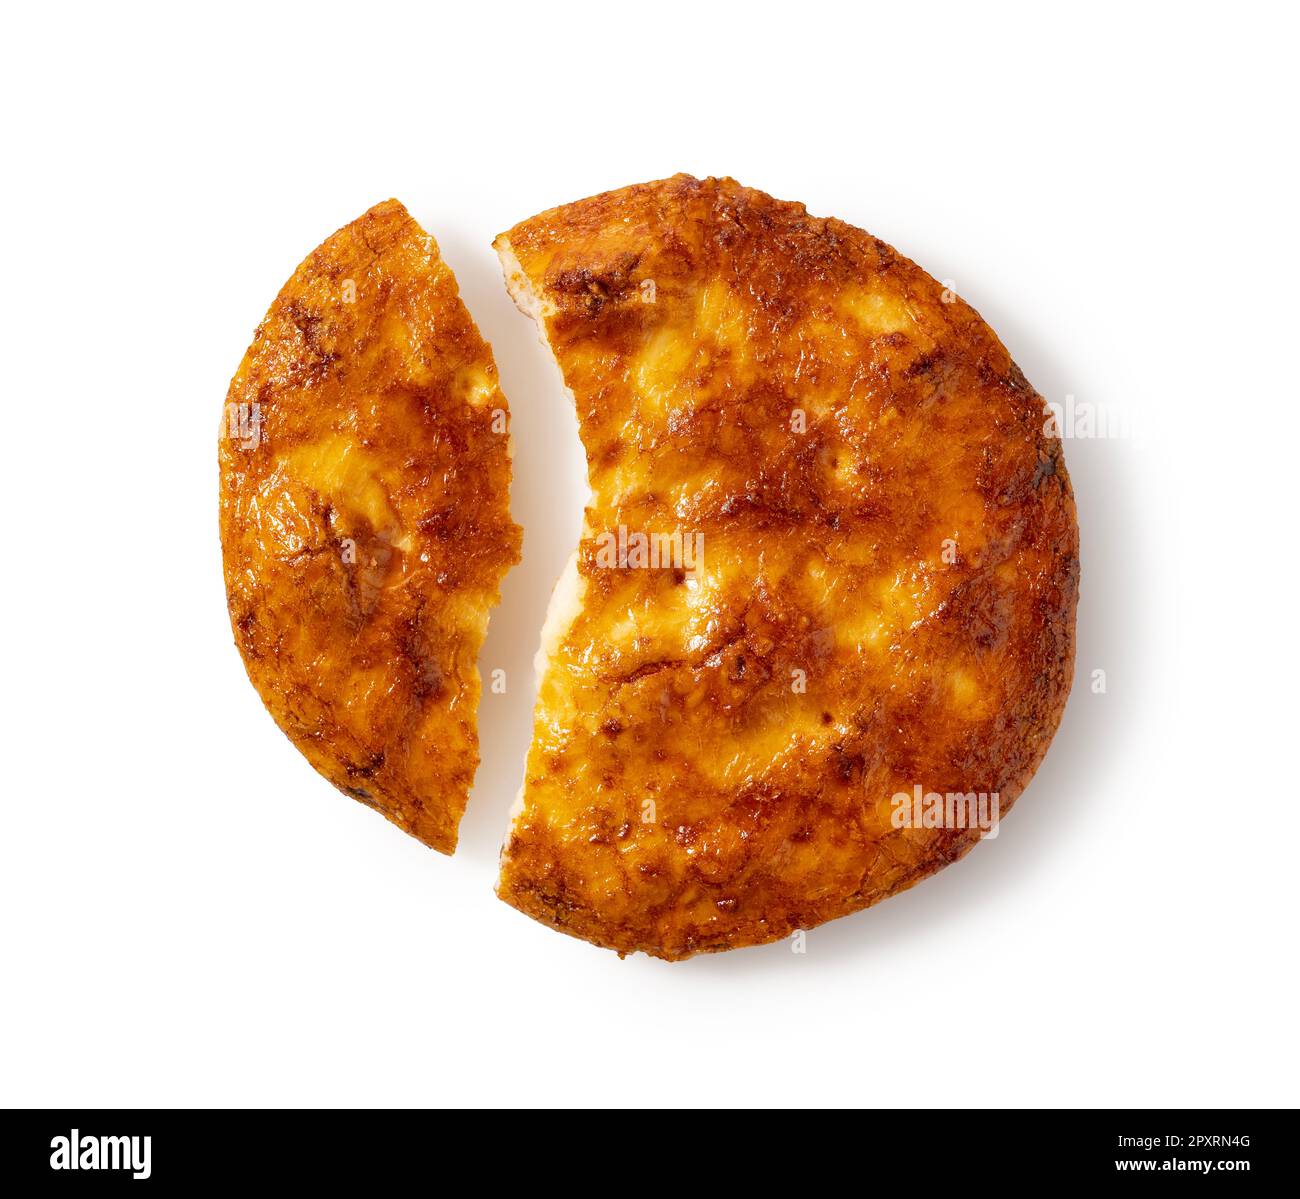 Cracked rice crackers placed on a white background. Sembe is a Japanese snack. A view from above. Stock Photo